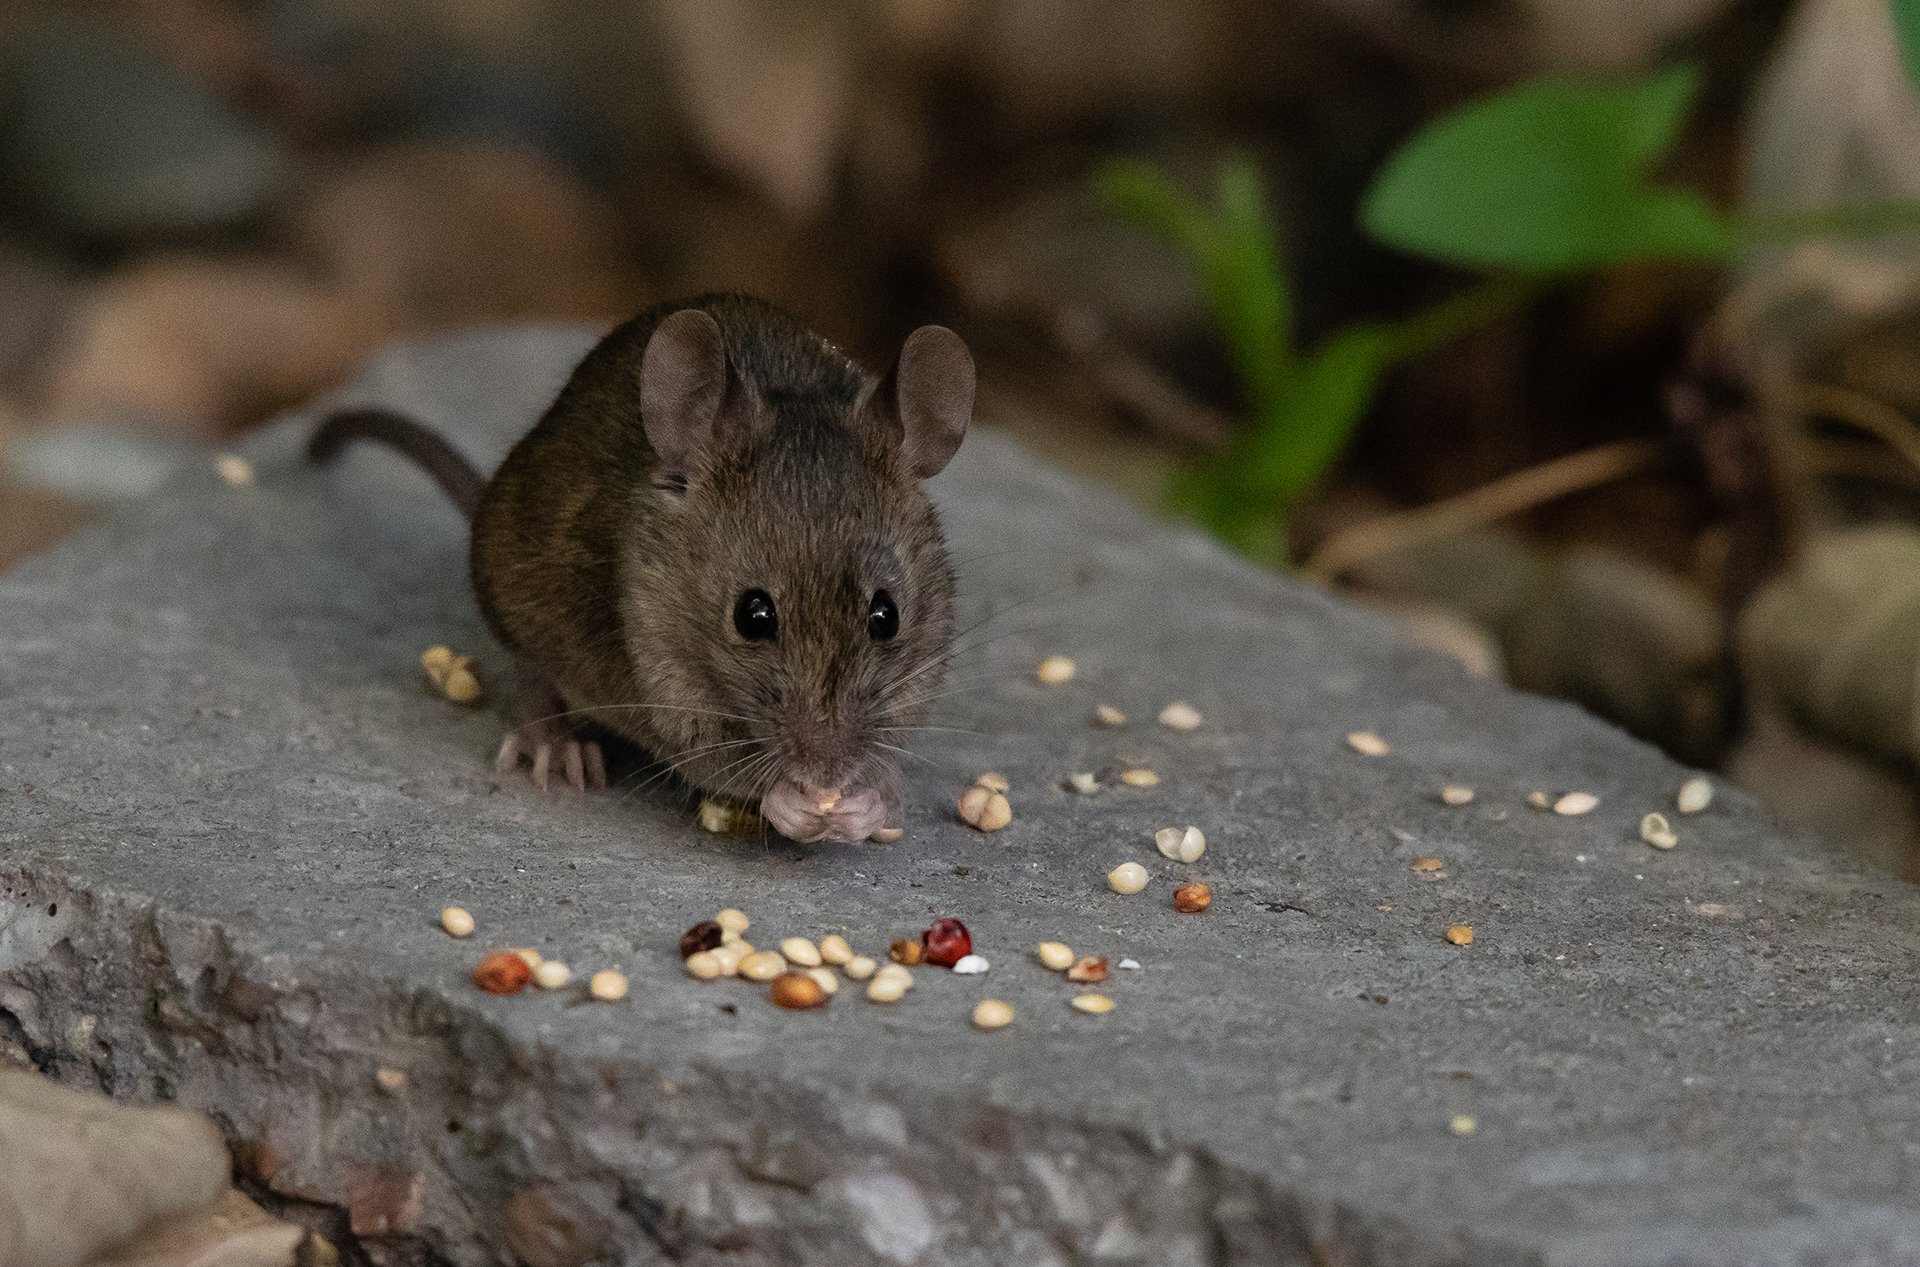 What human food can wild mice eat?